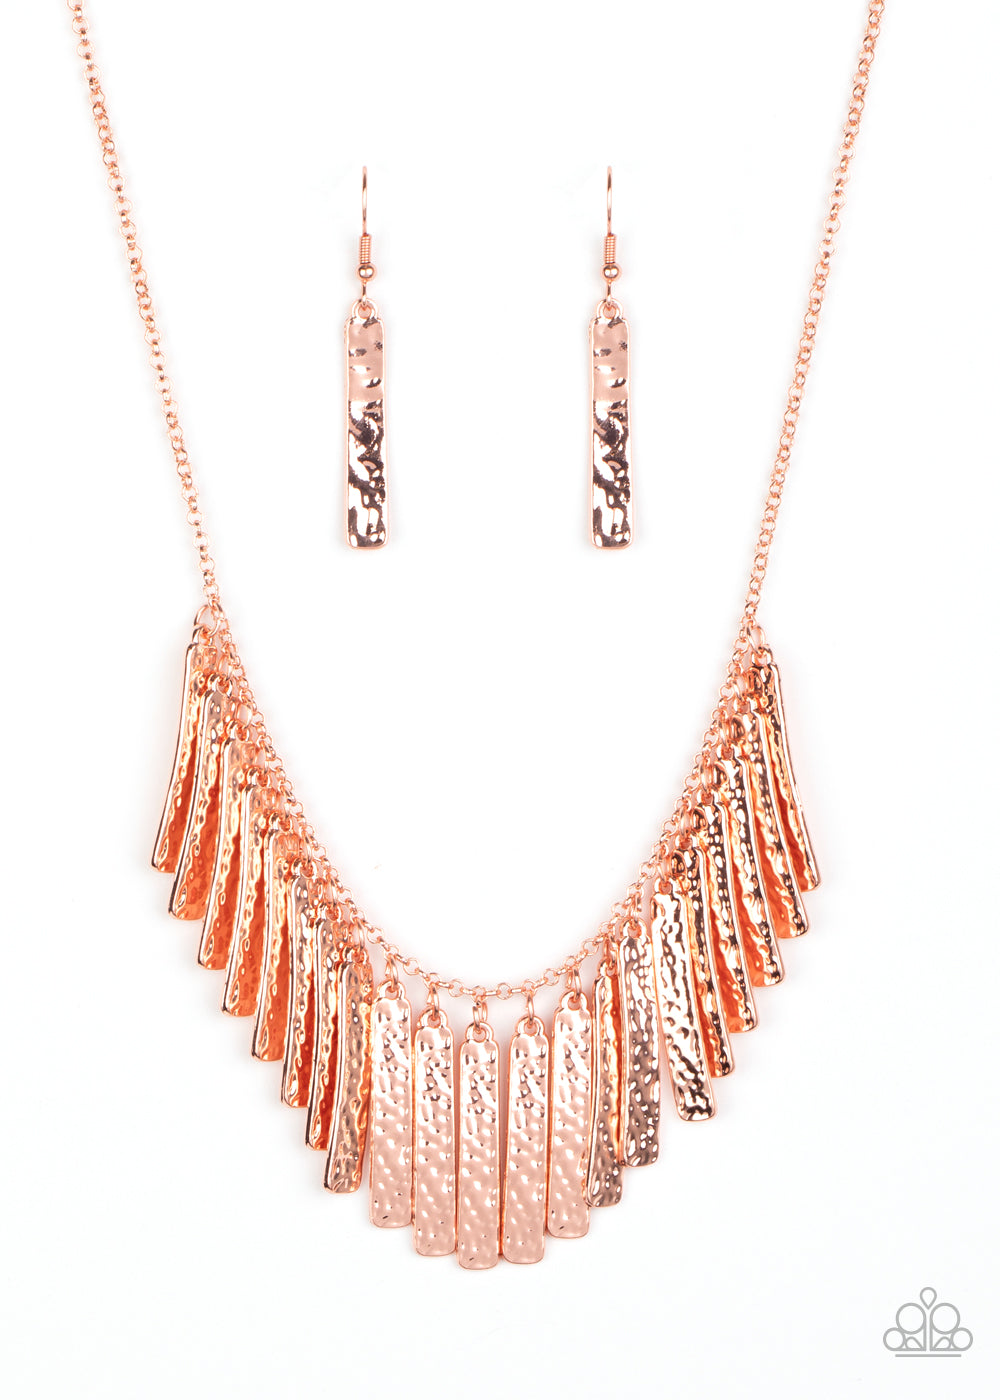 Metallic Muse - Copper  Paparazzi Accessories - Bella Bling by Natalie